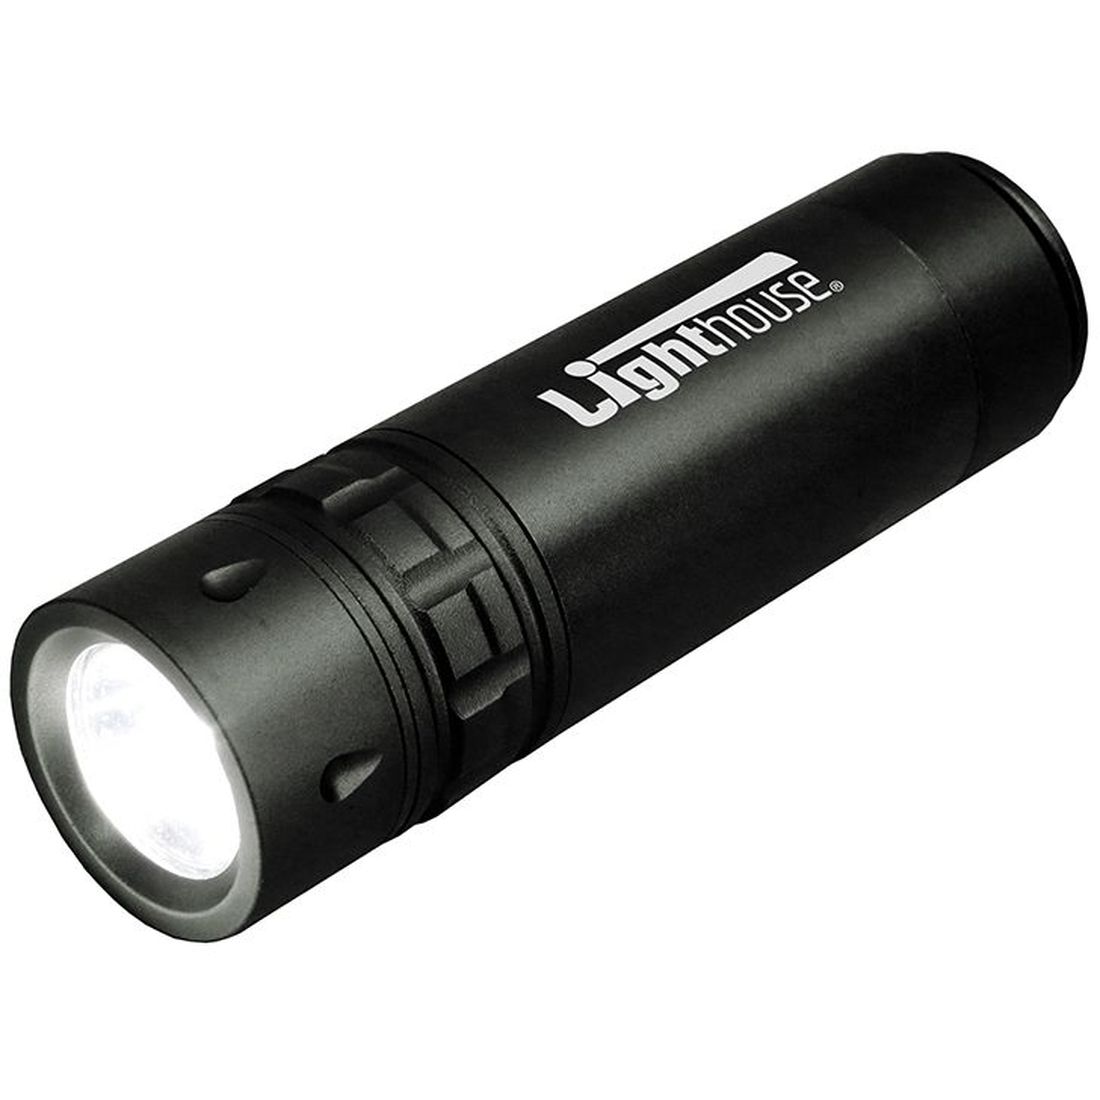 Lighthouse Rechargeable LED Pocket Torch 120 lumens                                        